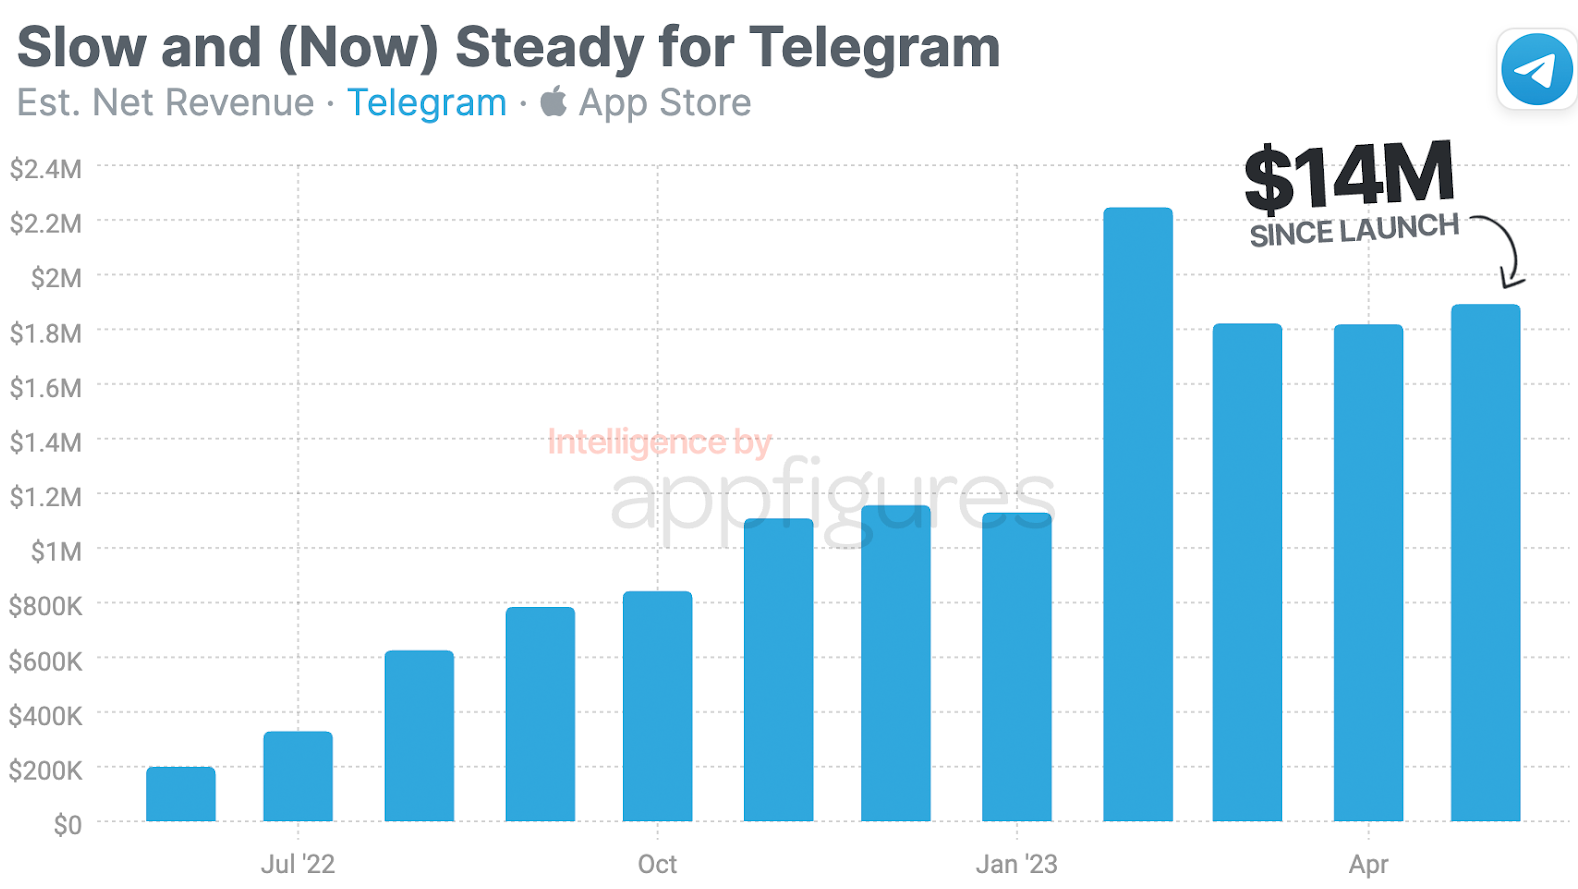 Telegram Revenue Grows and Hits $14 Million Mark Since Initiating Monetization